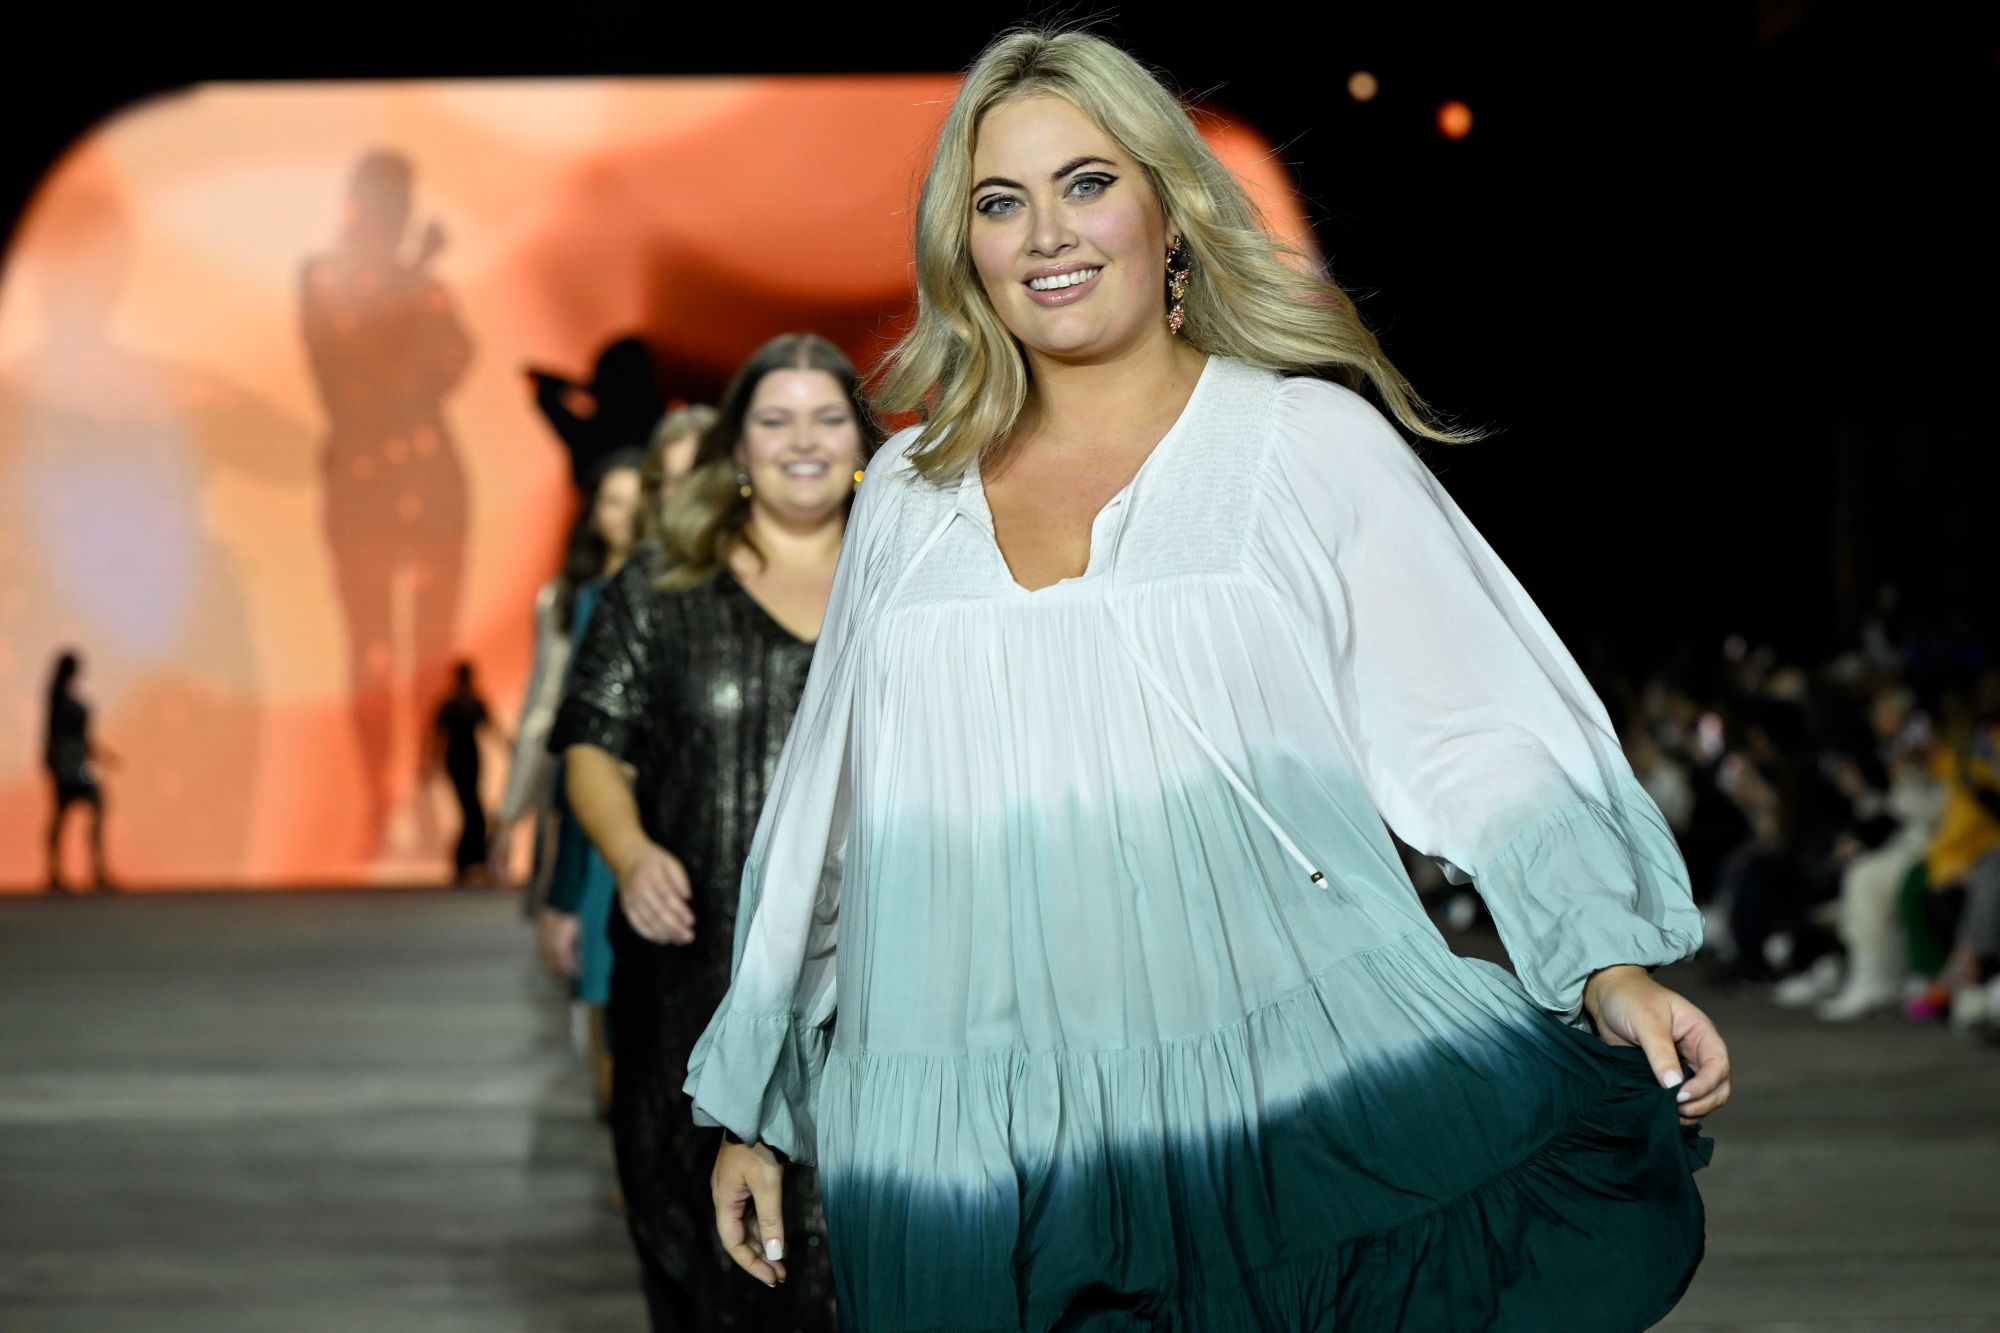 Australian Fashion Week hosts its first ever plus-size runway show